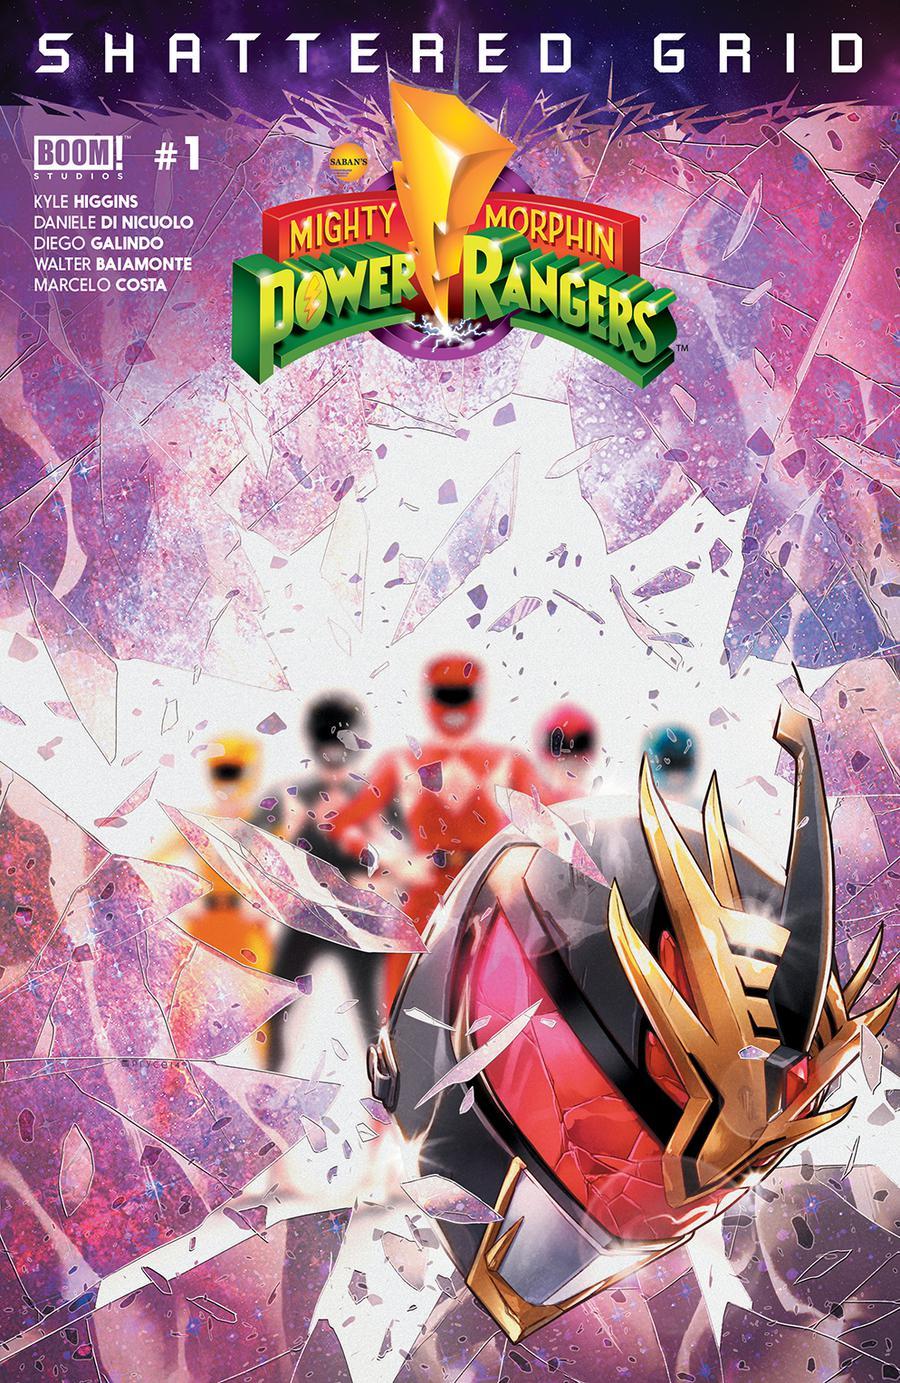 Mighty Morphin Power Rangers Shattered Grid Vol. 1 #1